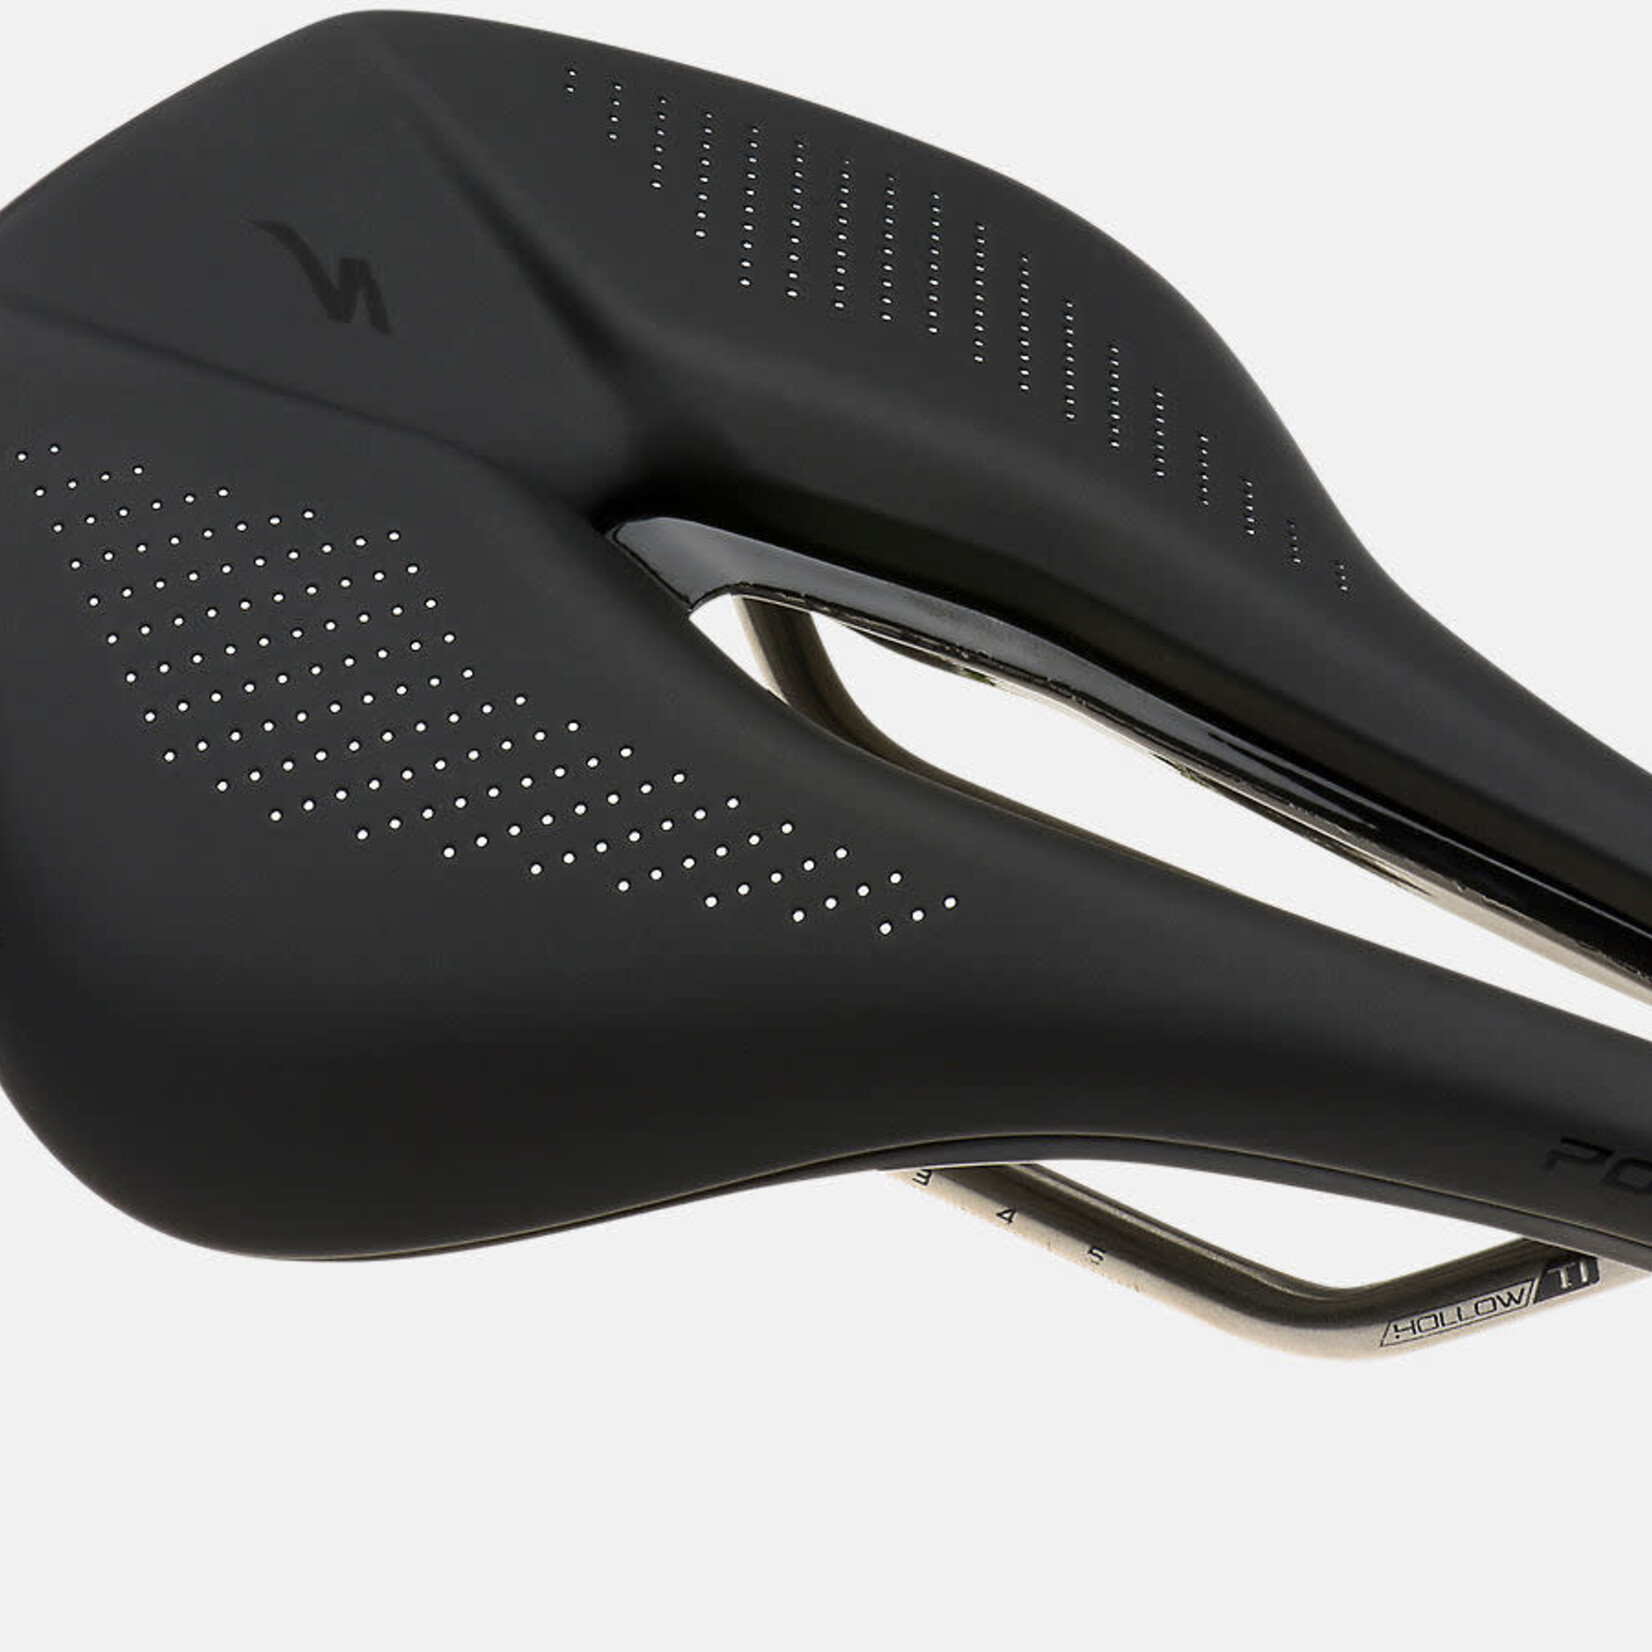 Specialized POWER EXPERT SADDLE BLK